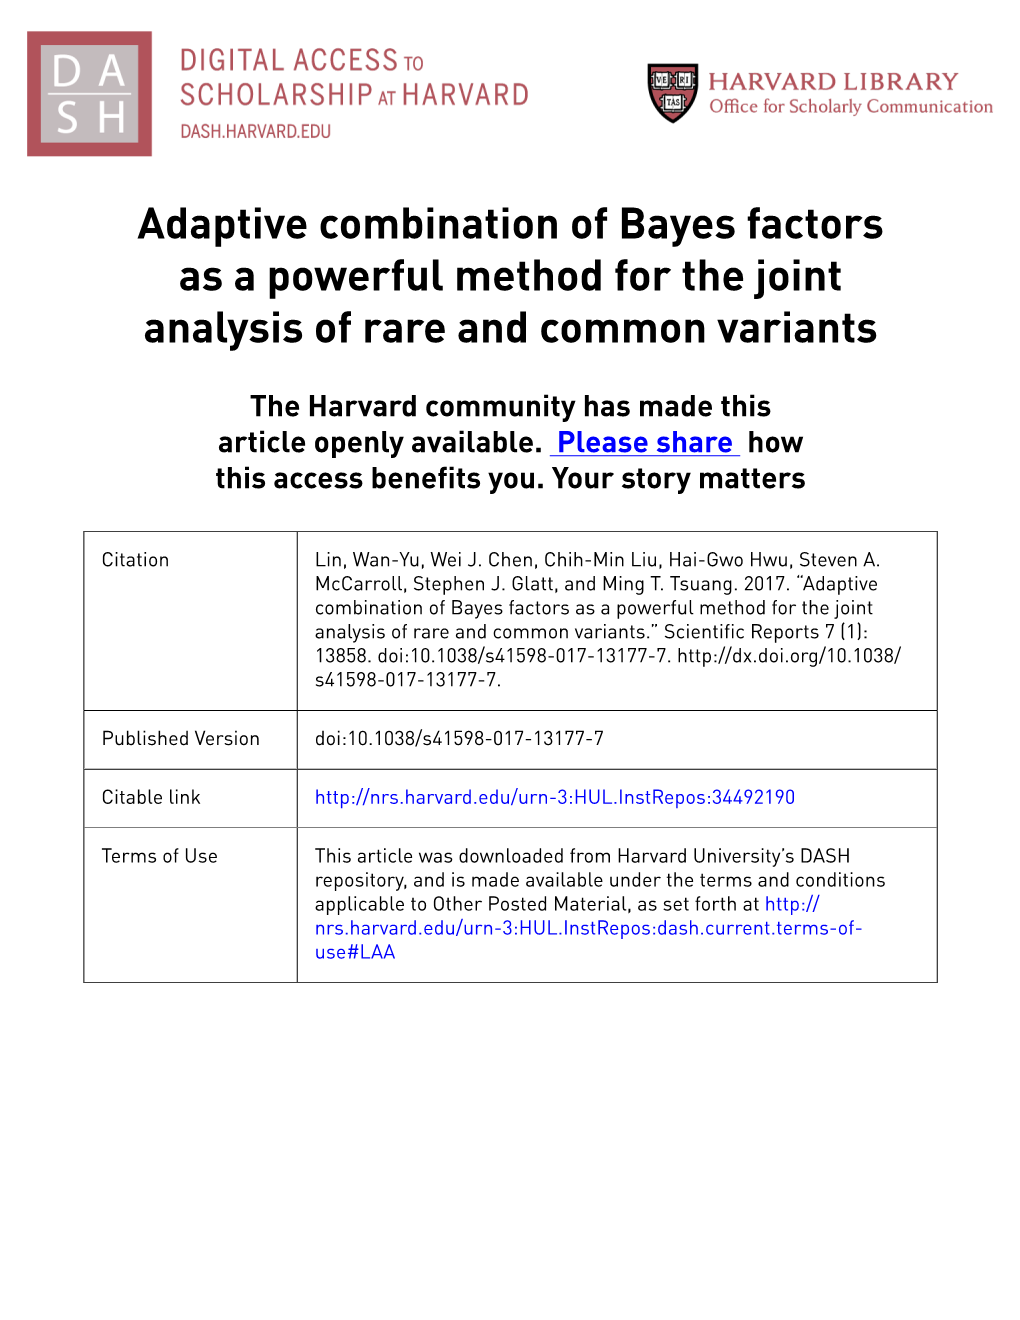 Adaptive Combination of Bayes Factors As a Powerful Method for the Joint Analysis of Rare and Common Variants